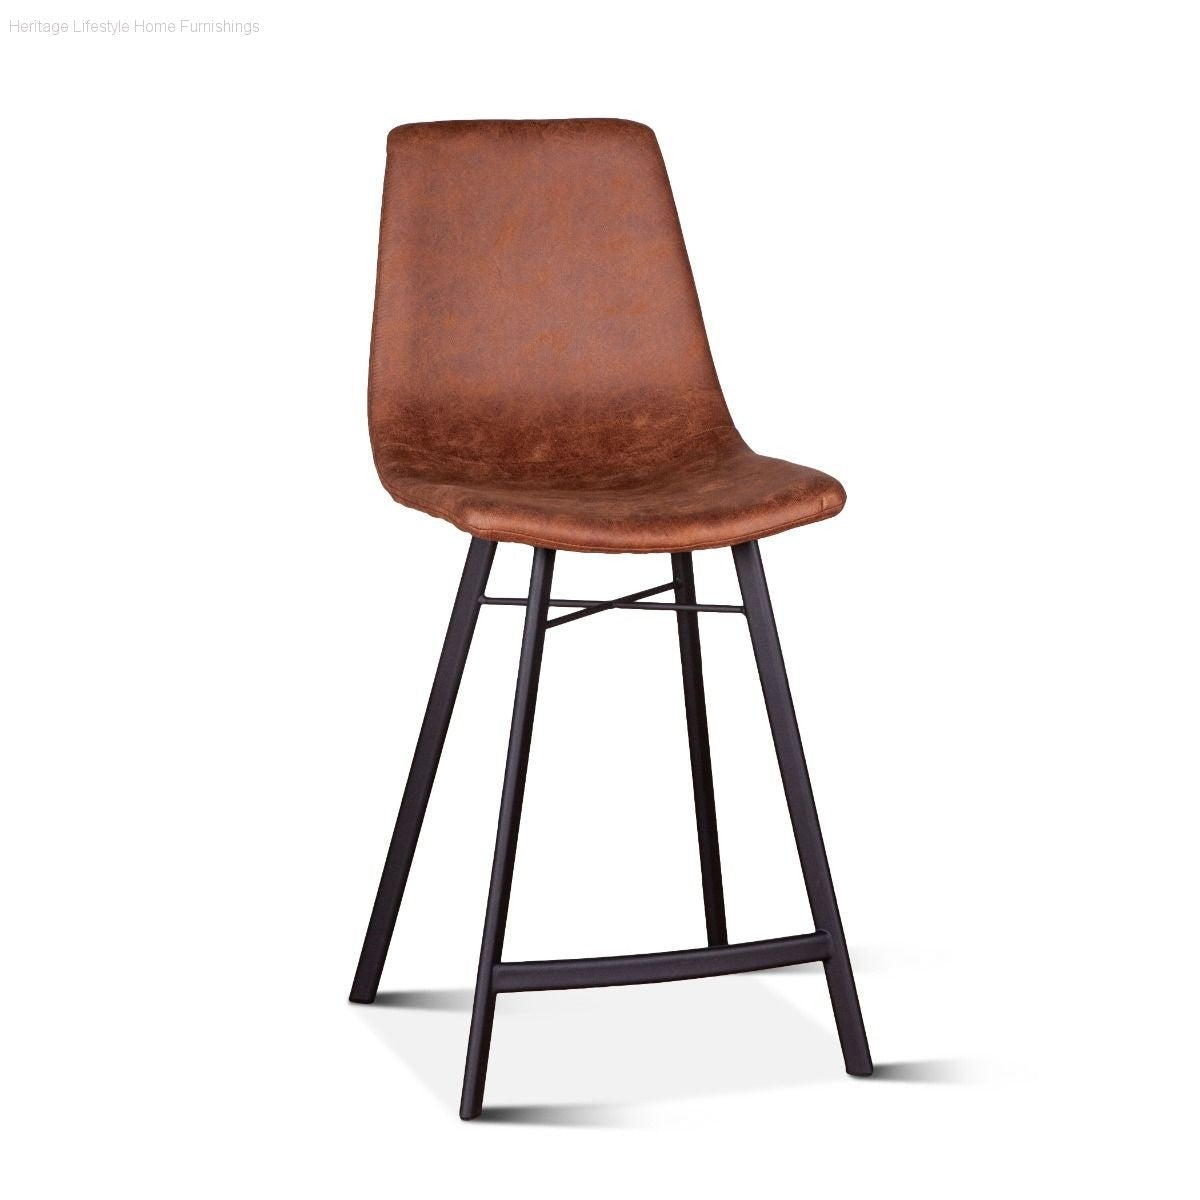 Stool - Sam Counter Stool - Trapper Brown Coated Fabric